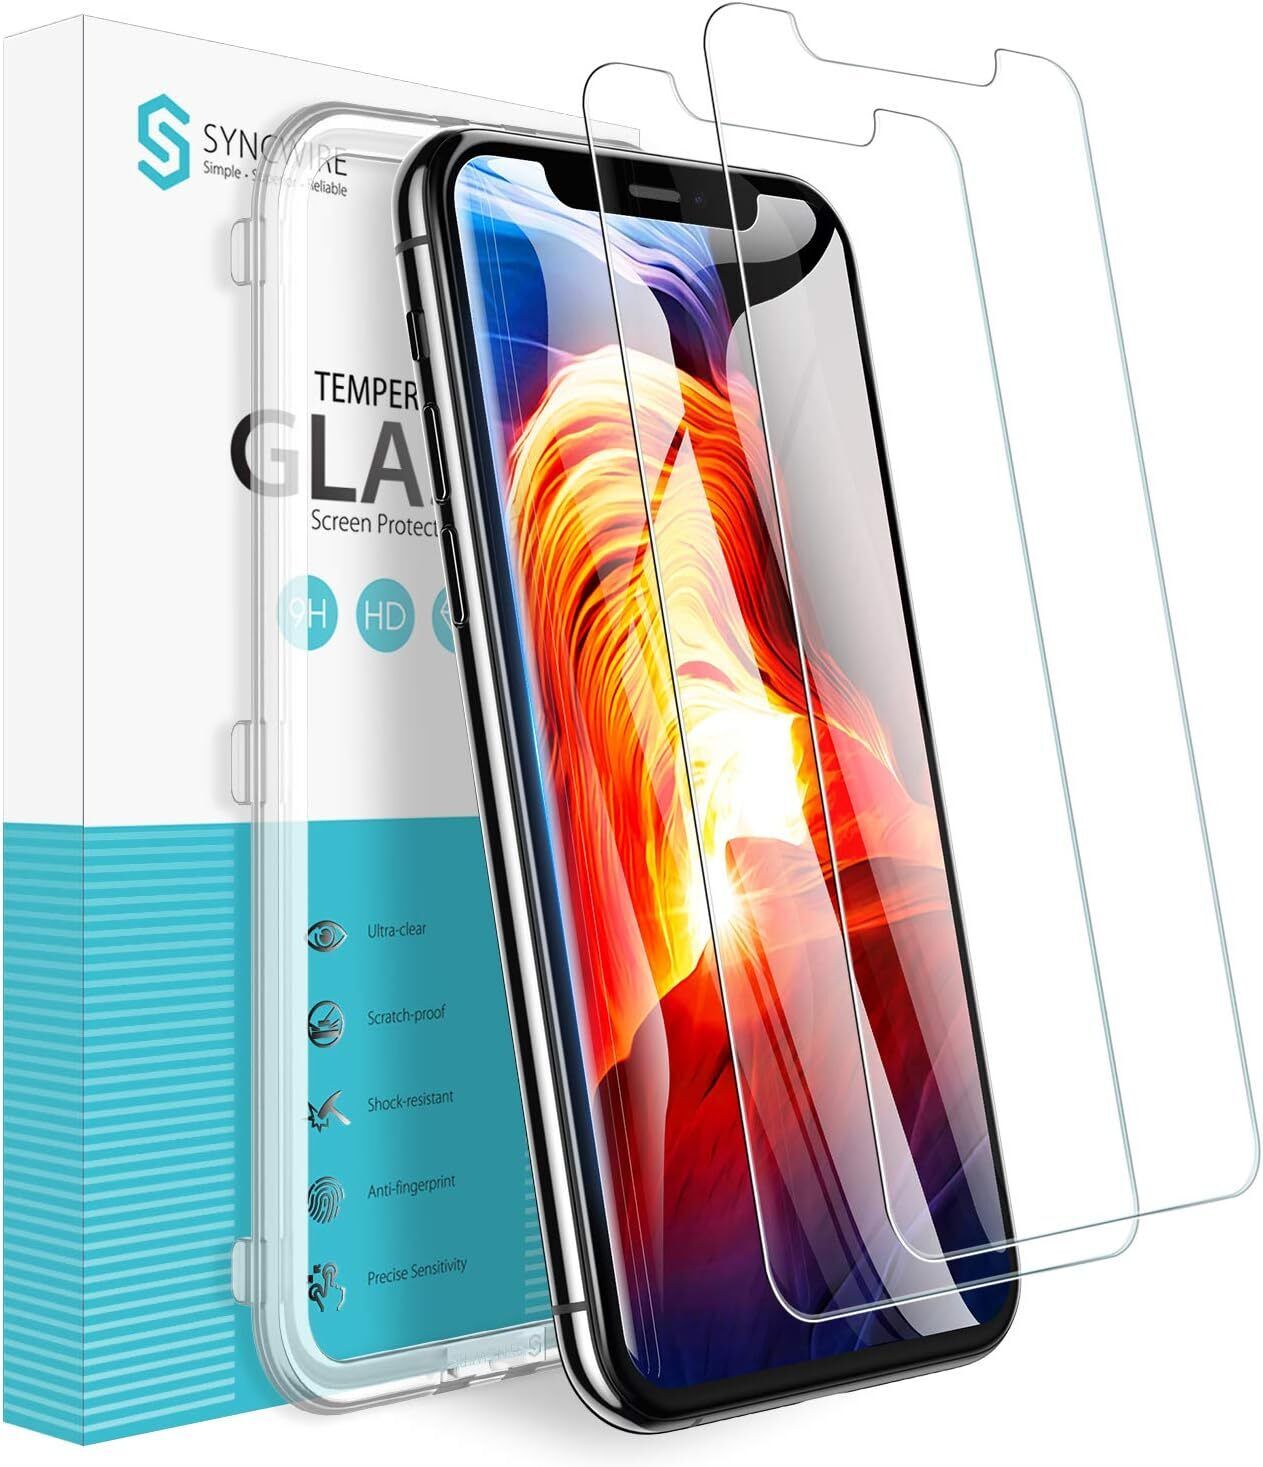 Syncwire Screen Protector For iPhone 11 Pro/X/XS 9H Hardness, Bubble Free 2-Pack - RLO Tech